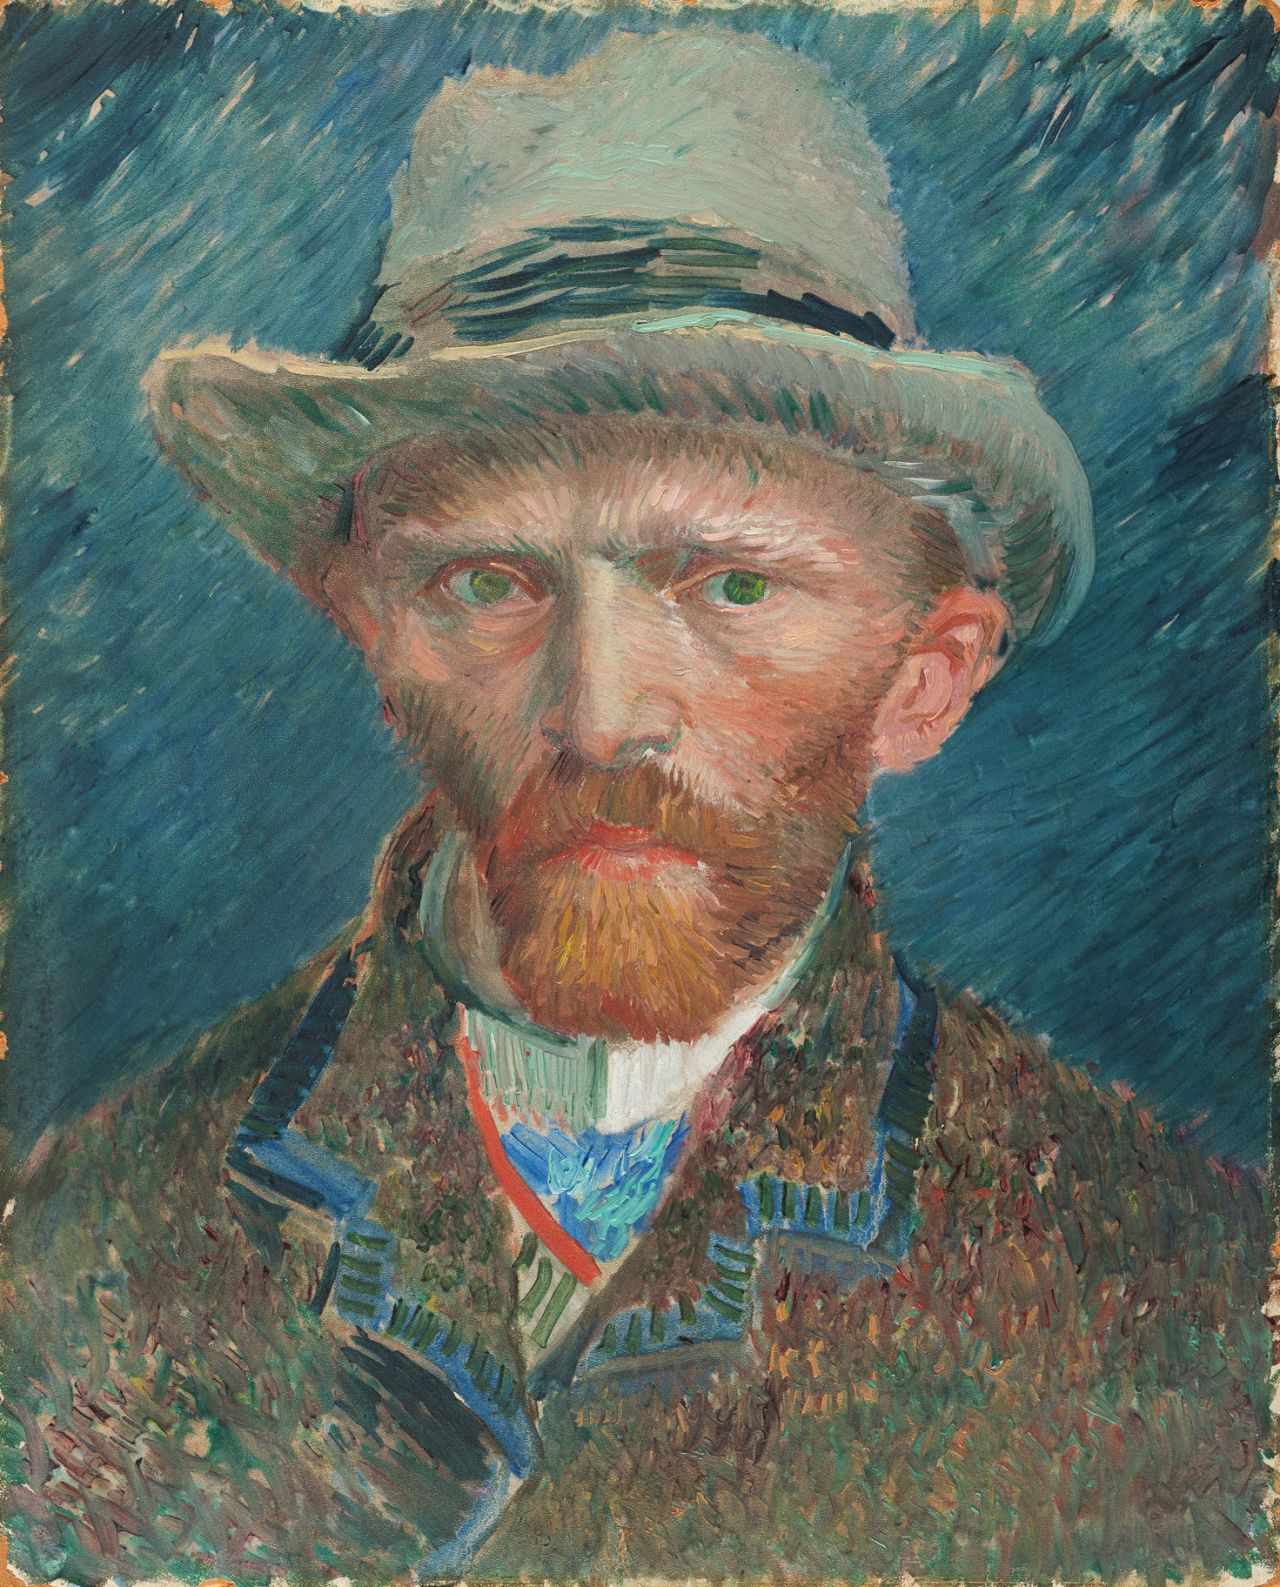 The museum's collection of one million objects, some 8,000 of which are on display at any one time, span 800 years, from the Middle Ages to modern artist Piet Mondrian, and including this 1887 self portrait by Vincent Van Gogh.